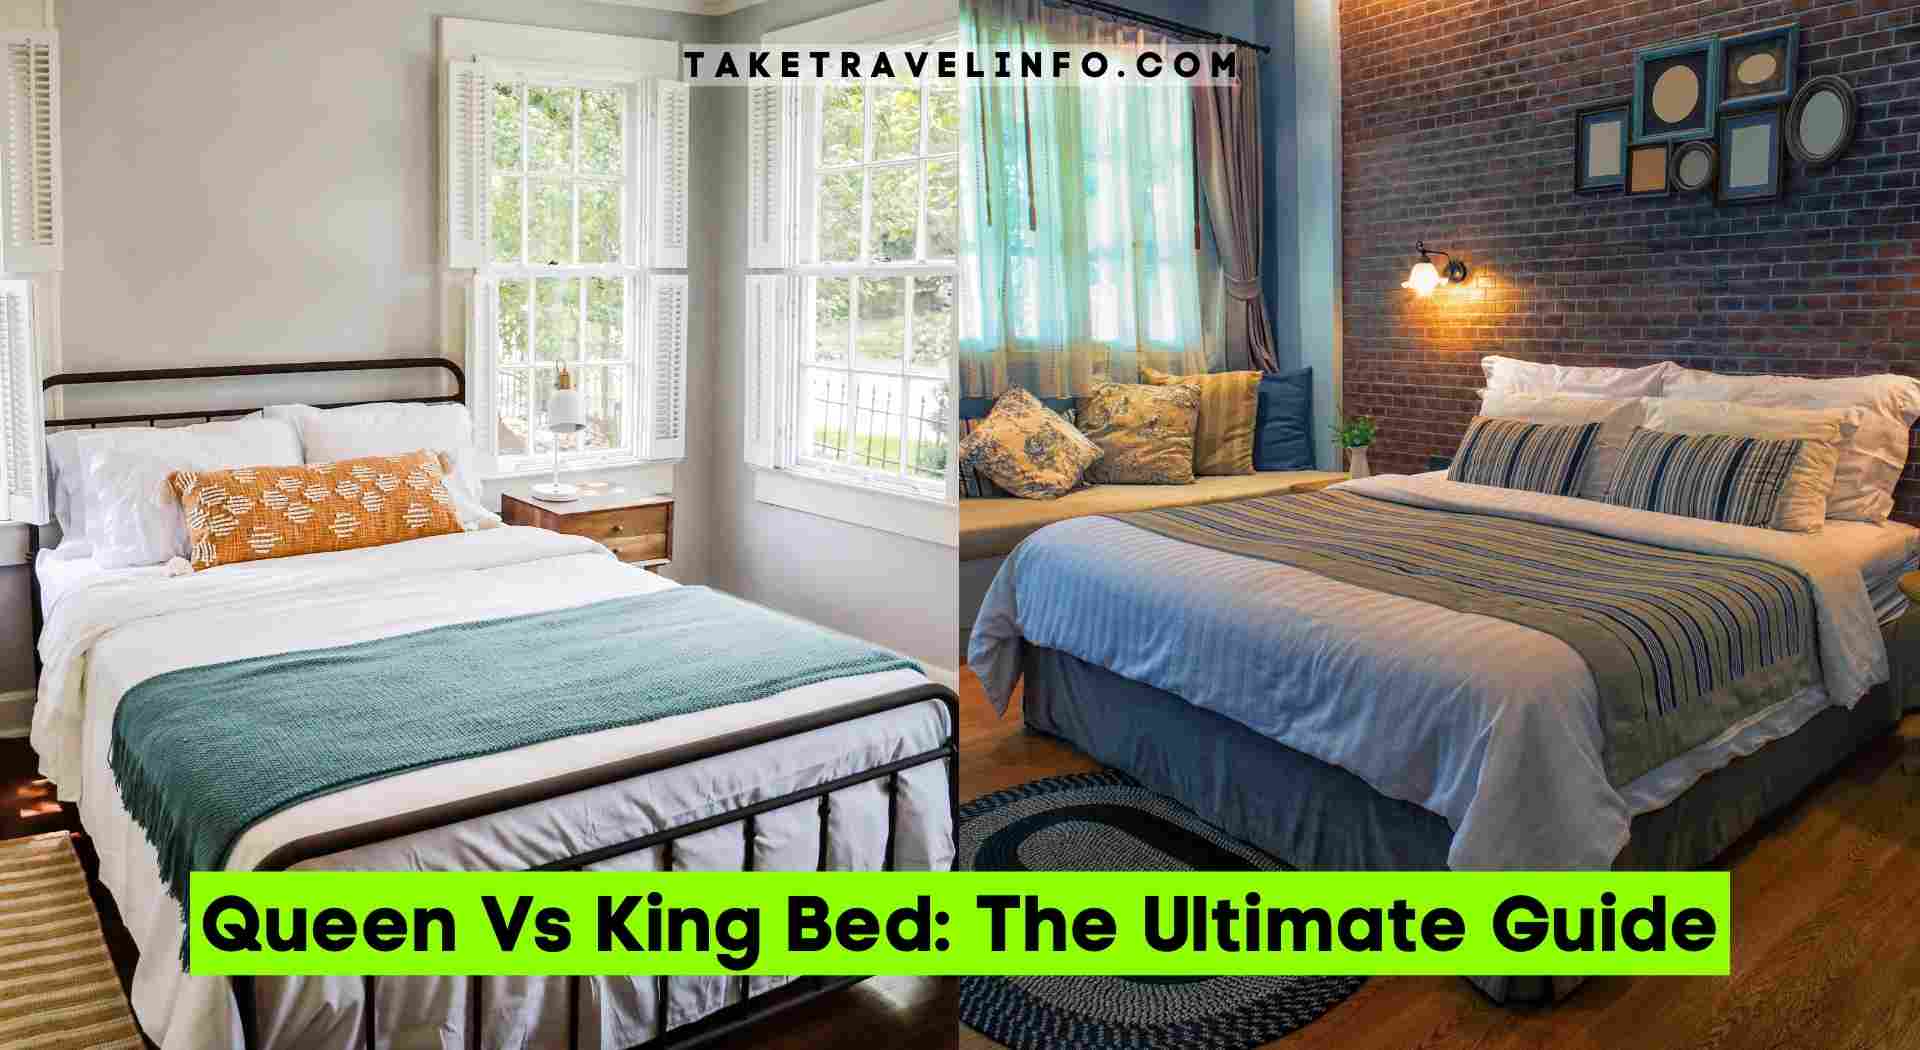 Queen Vs King Bed: The Ultimate Guide